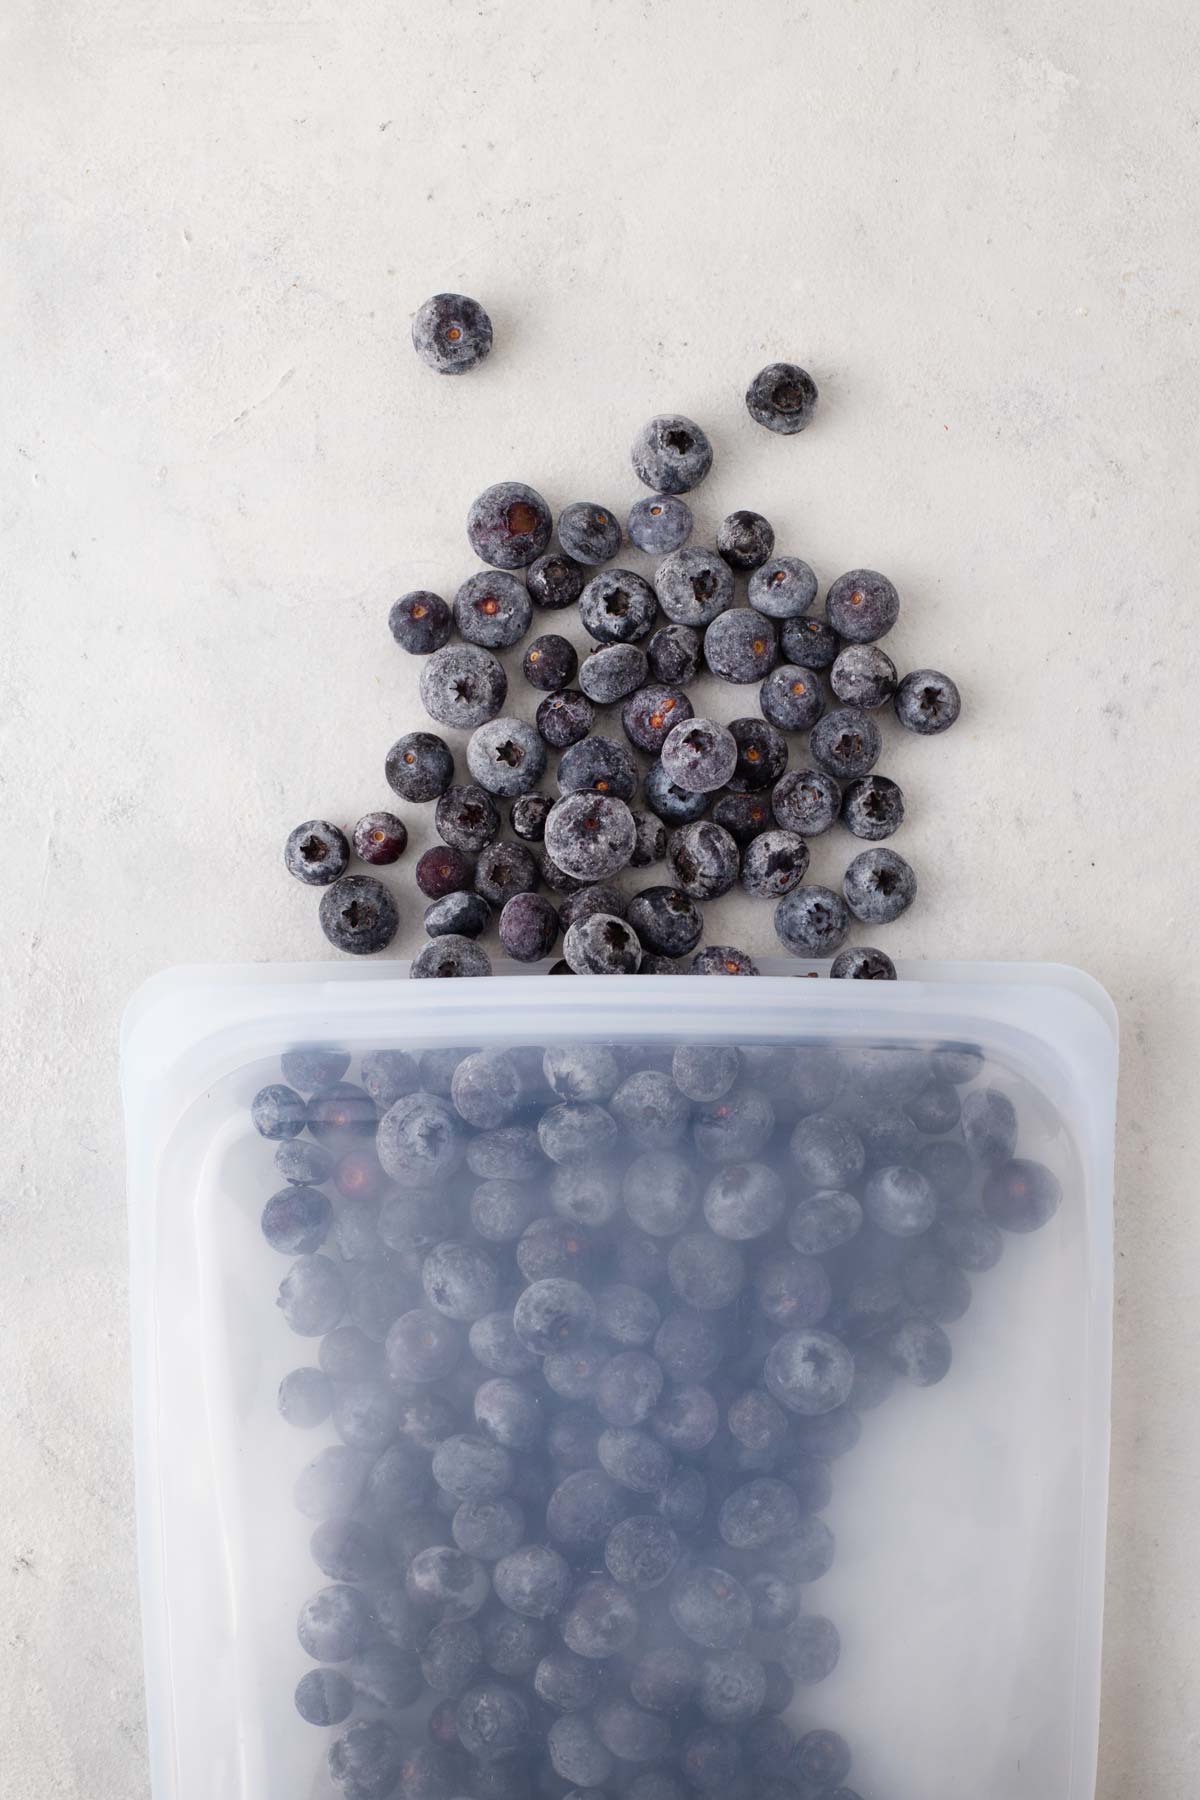 Frozen blueberries in a silicone bag.